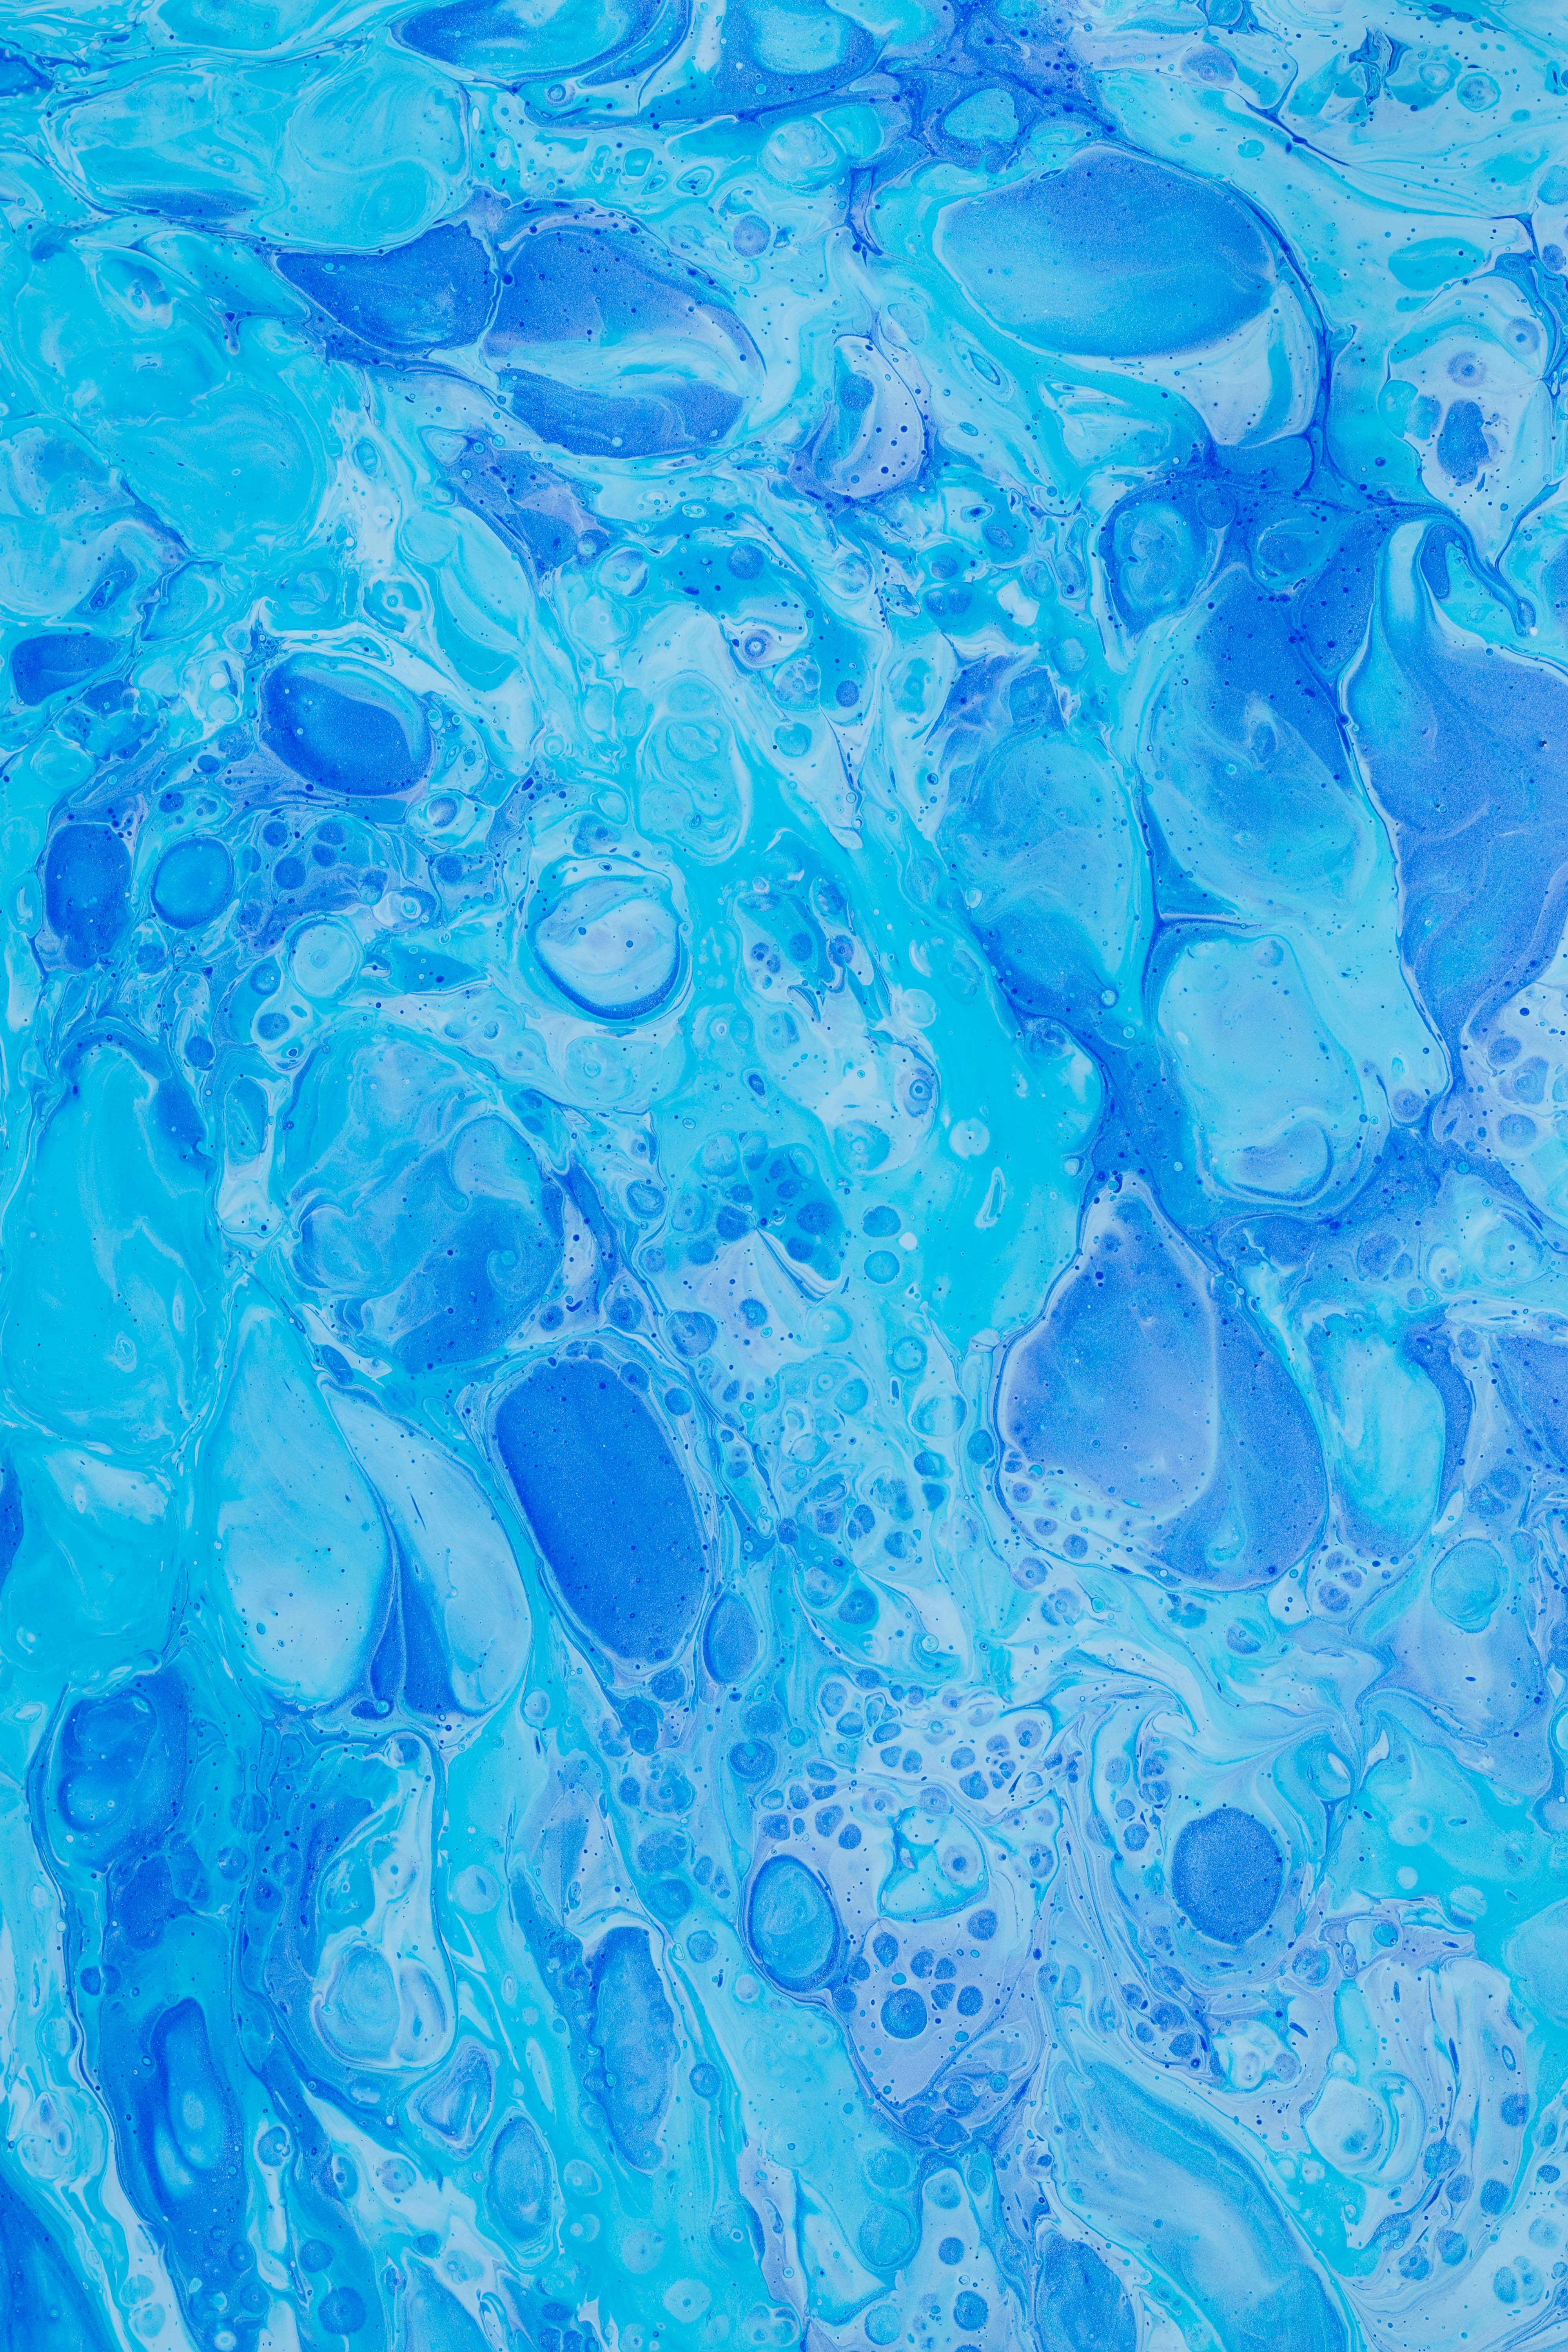 paint, blue, watercolor, abstract, stains, spots phone background